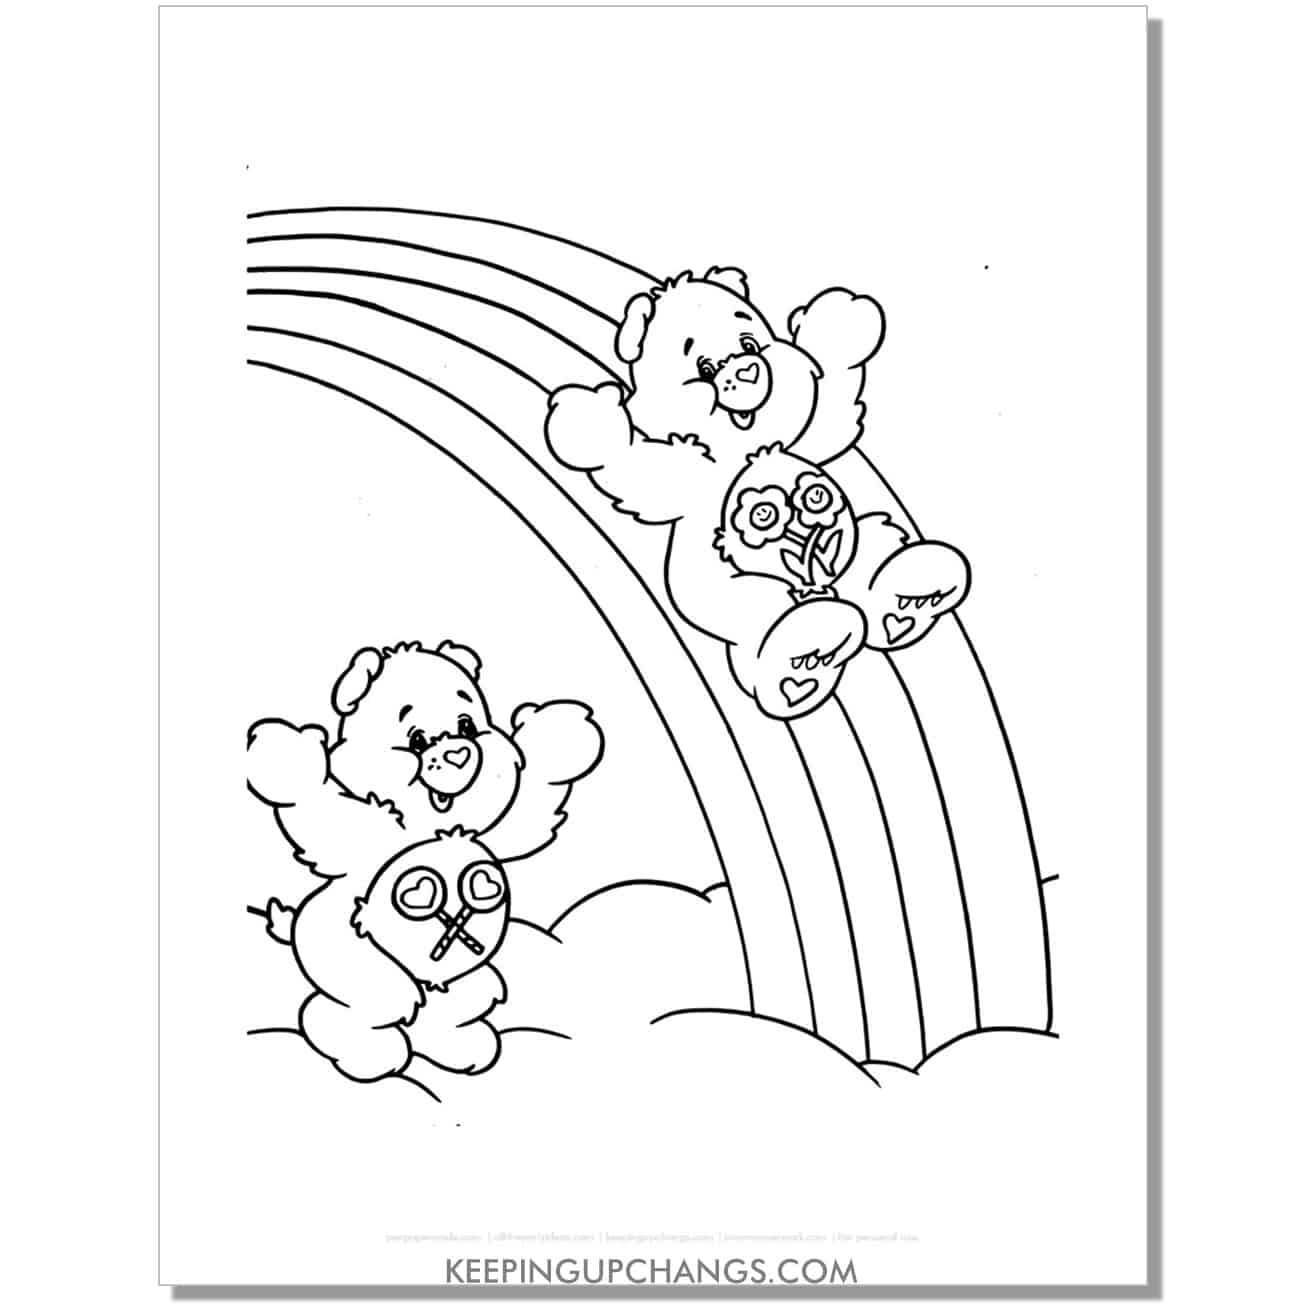 share, friend bear sliding on rainbows care bear coloring page, sheet.